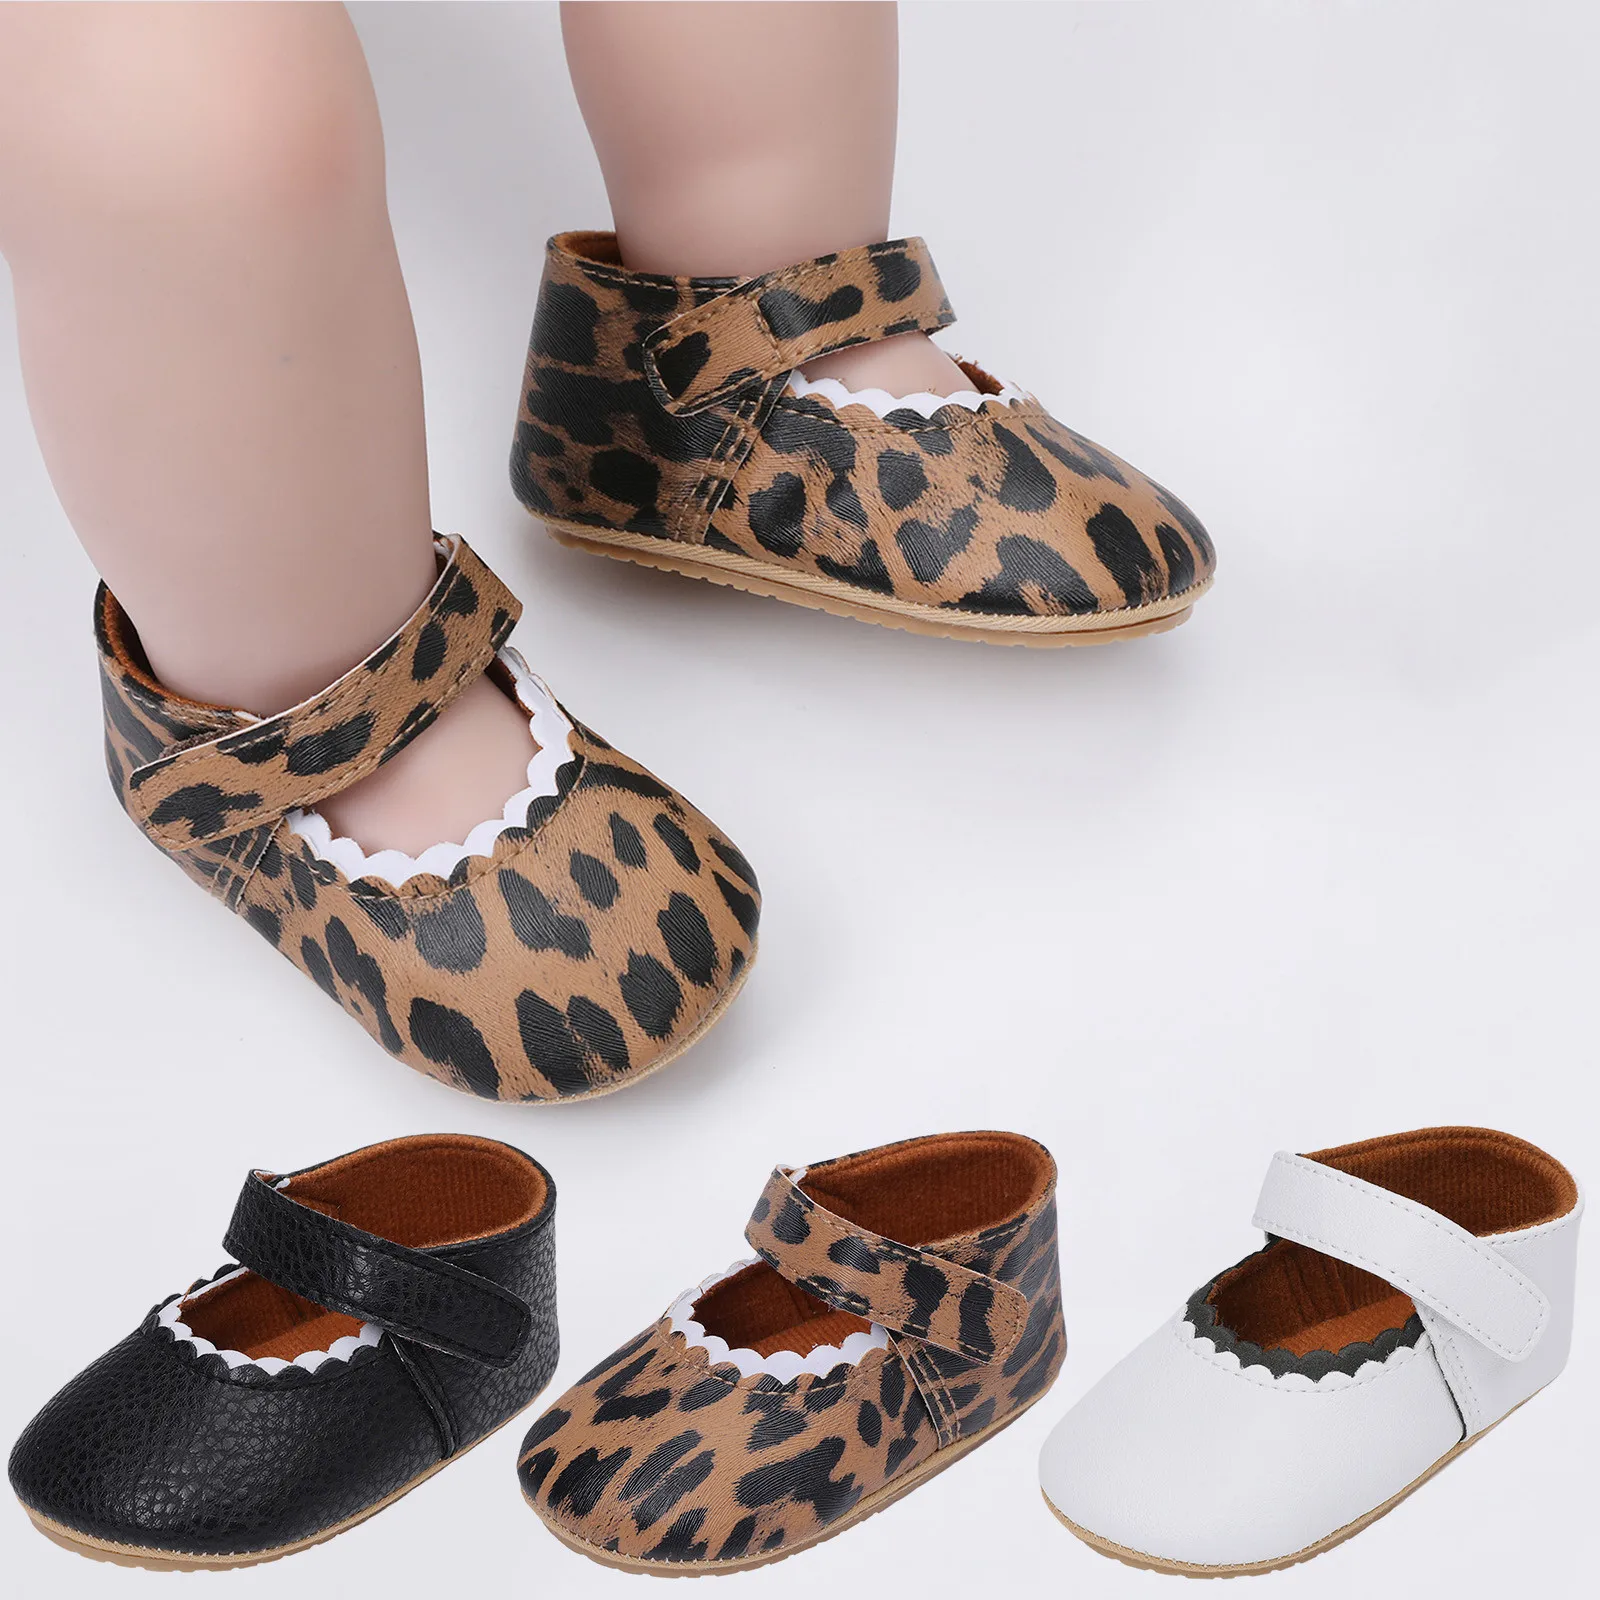 

Baby Boys Girls Shoes New Summer PU Leather Soft Anti-slip Flat Princess Baby Sandals Infant Toddler First Walkers sandalias